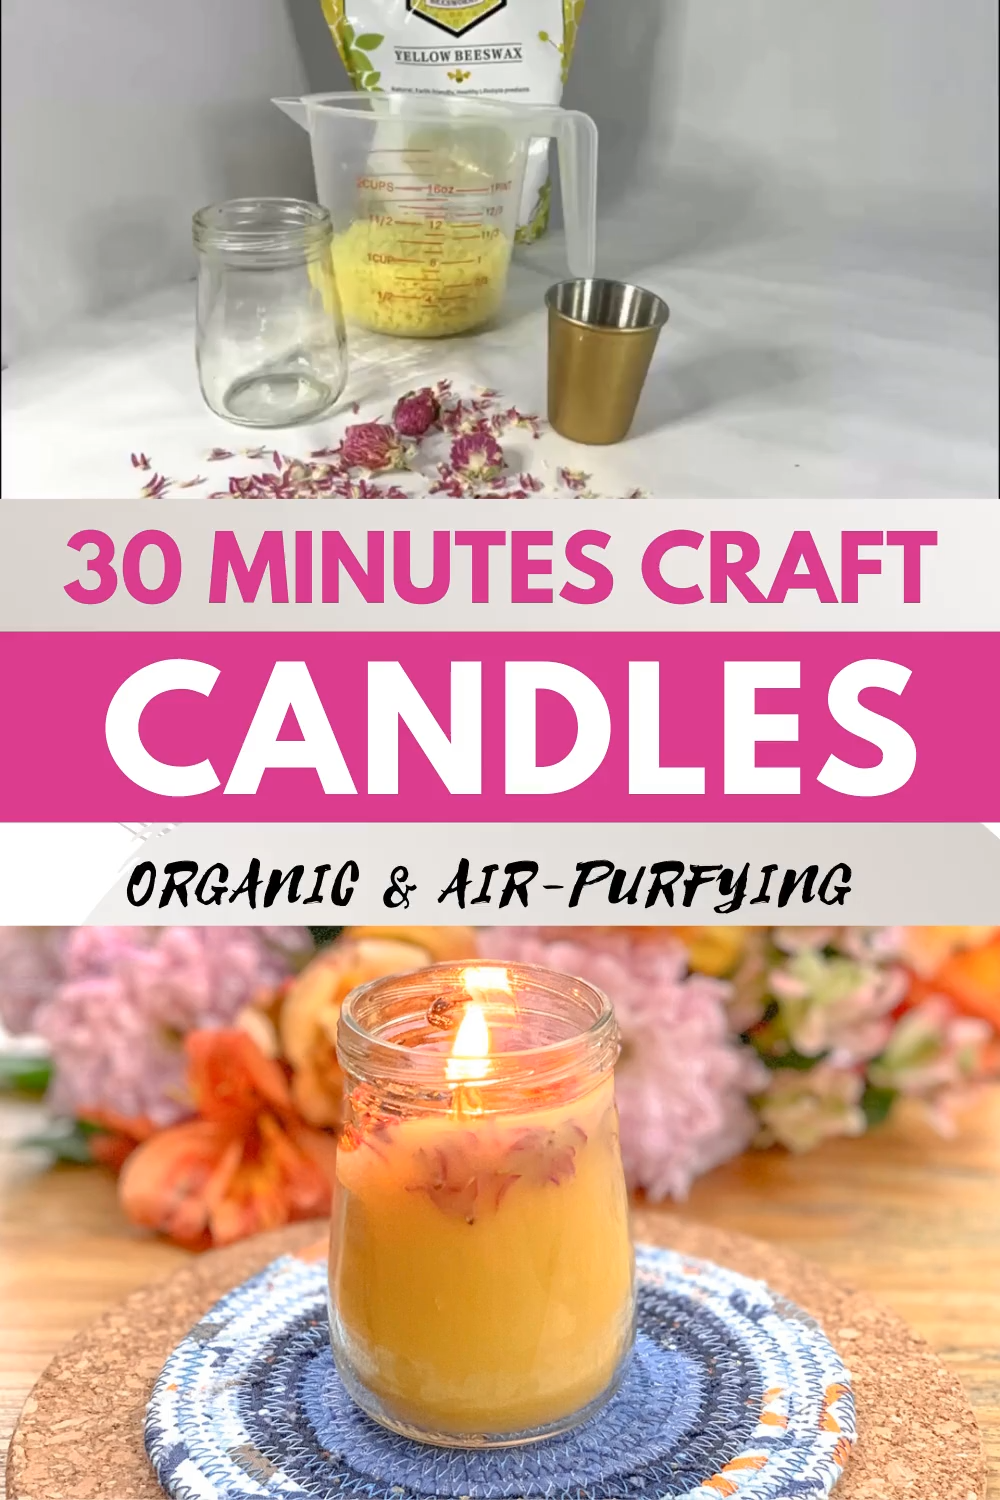 Do you want to make a natural beeswax candle? - Learn to create beautiful things - Do you want to make a natural beeswax candle? - Learn to create beautiful things -   19 beauty DIY crafts ideas